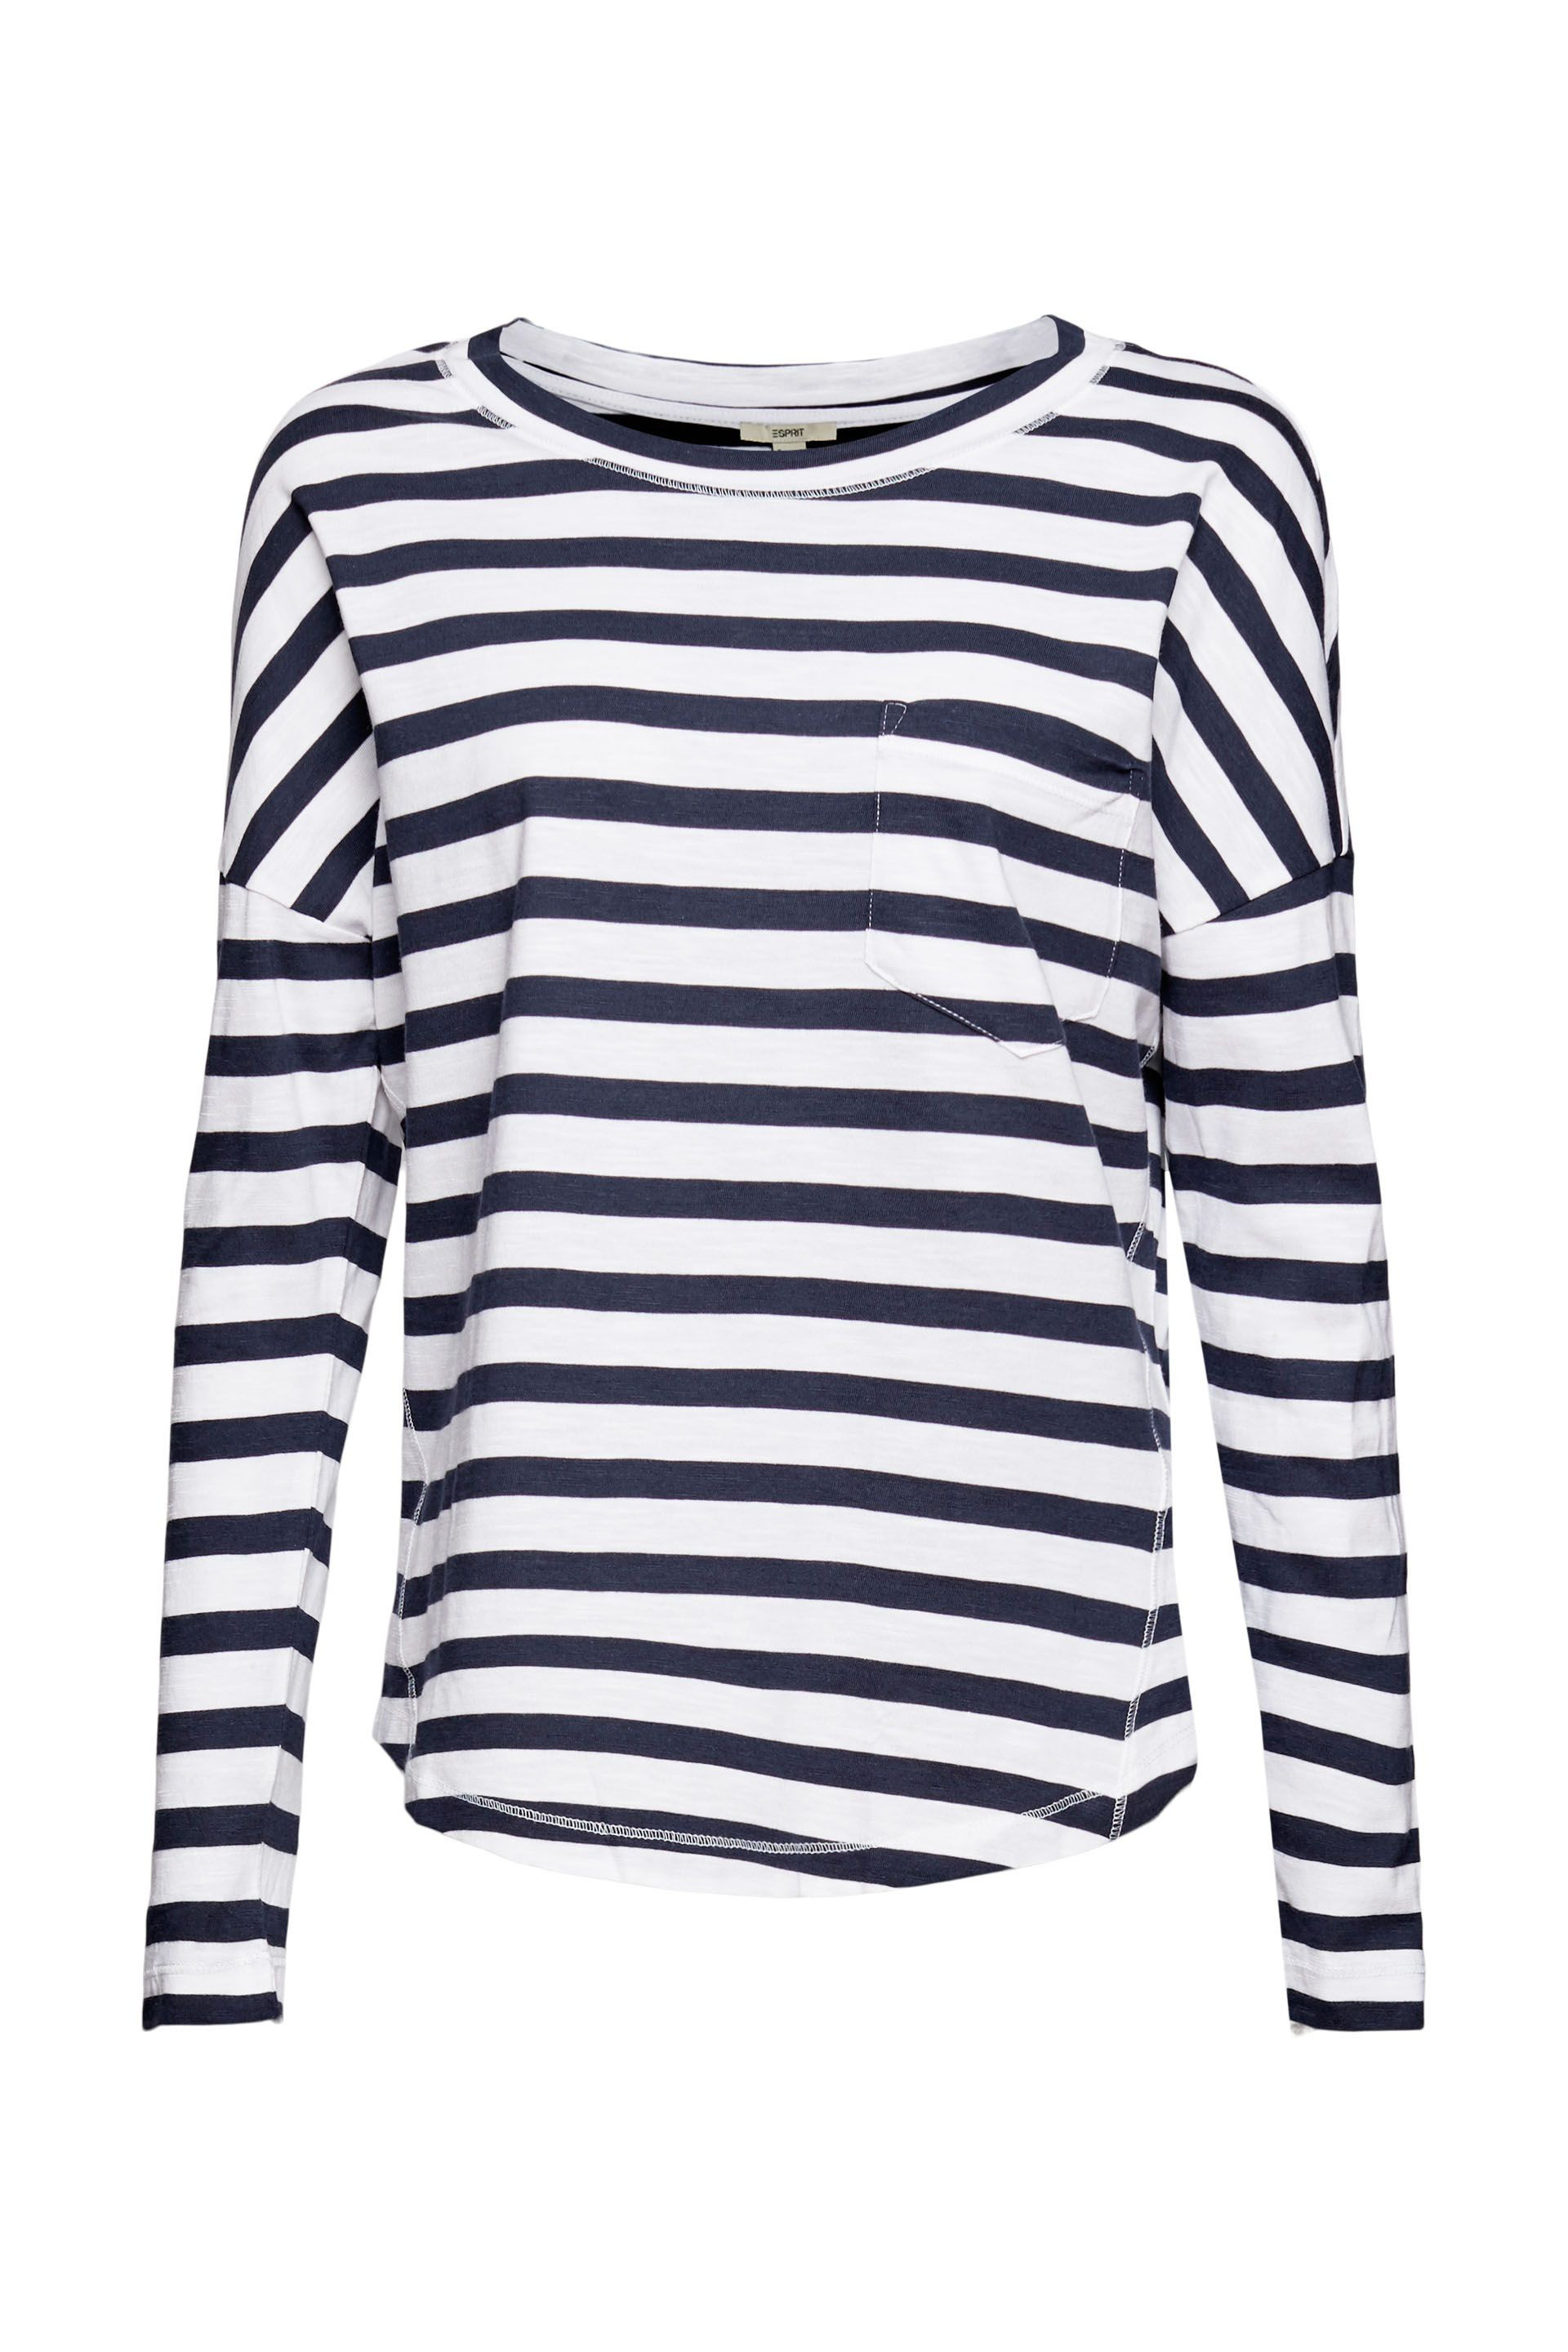 Striped T-shirt with pocket, White, large image number 0